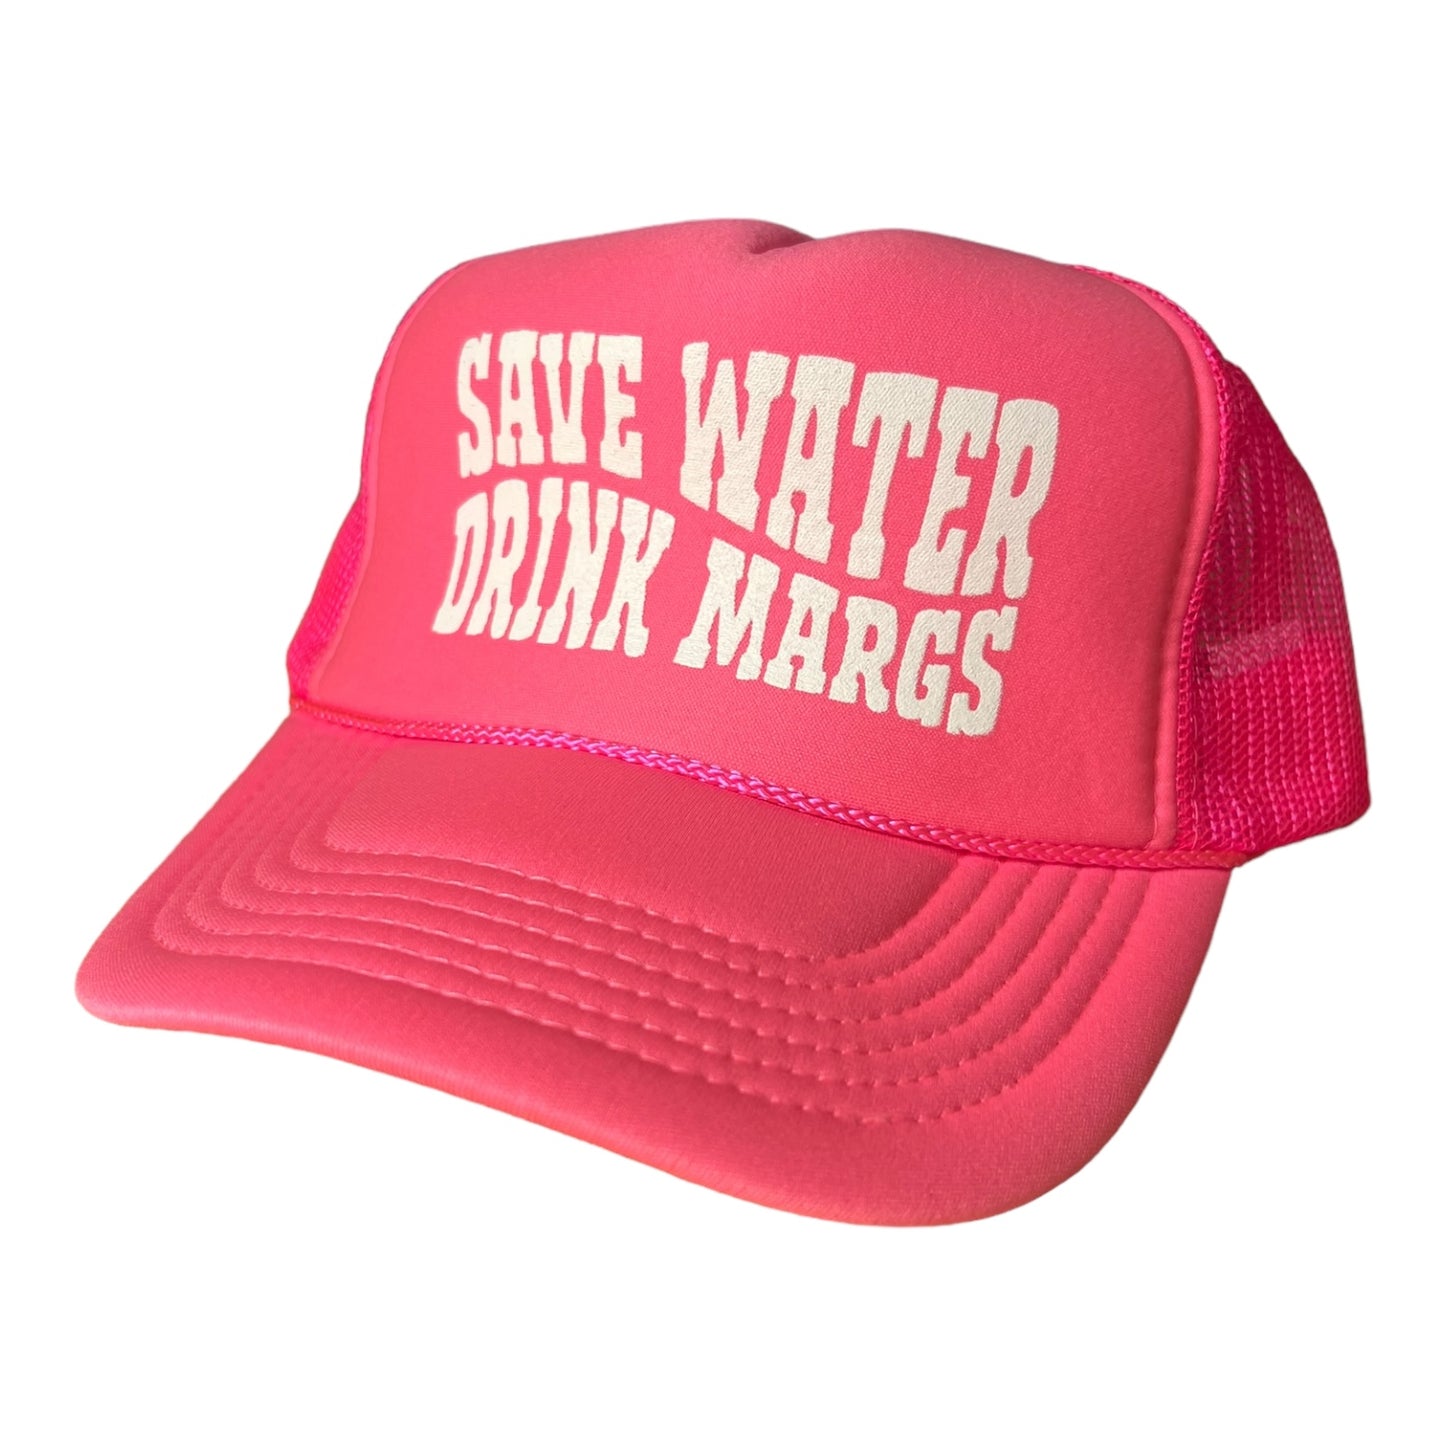 Save Water Drink Margs Hat Funny Trucker Hat Hot Pink